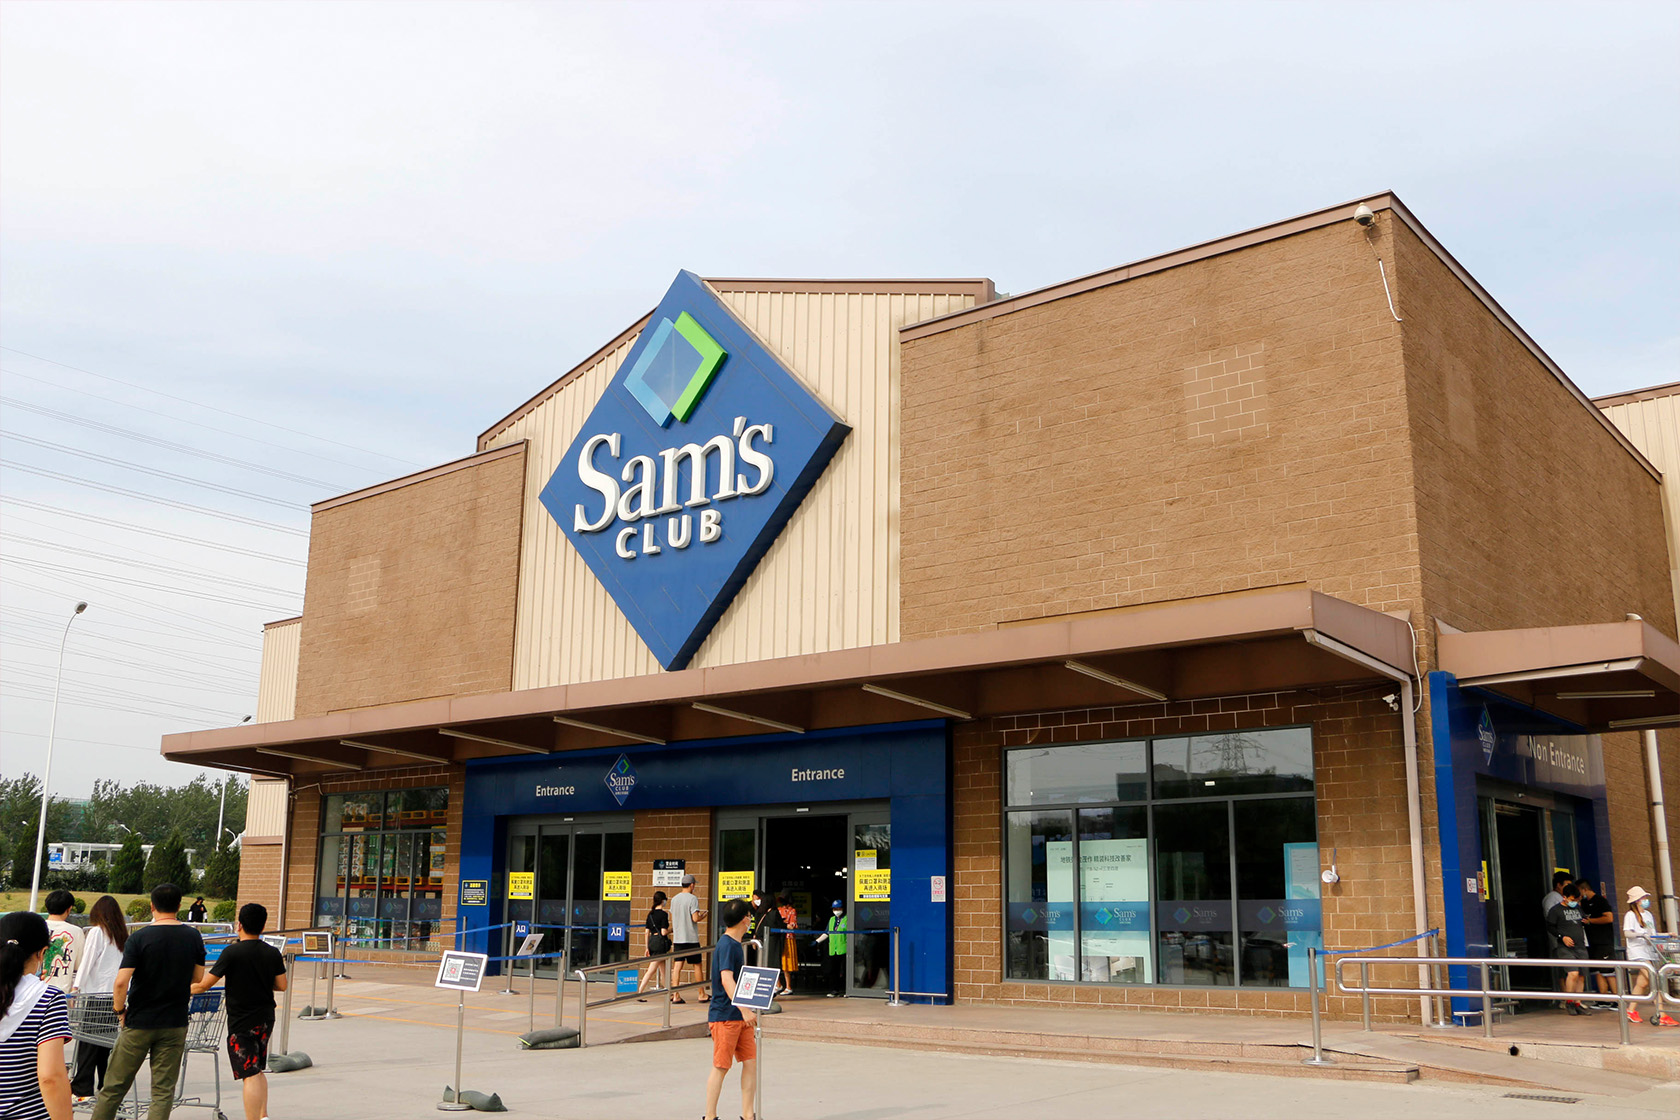 Shop smart with a Sam's Club membership (plus perks) for $24.99